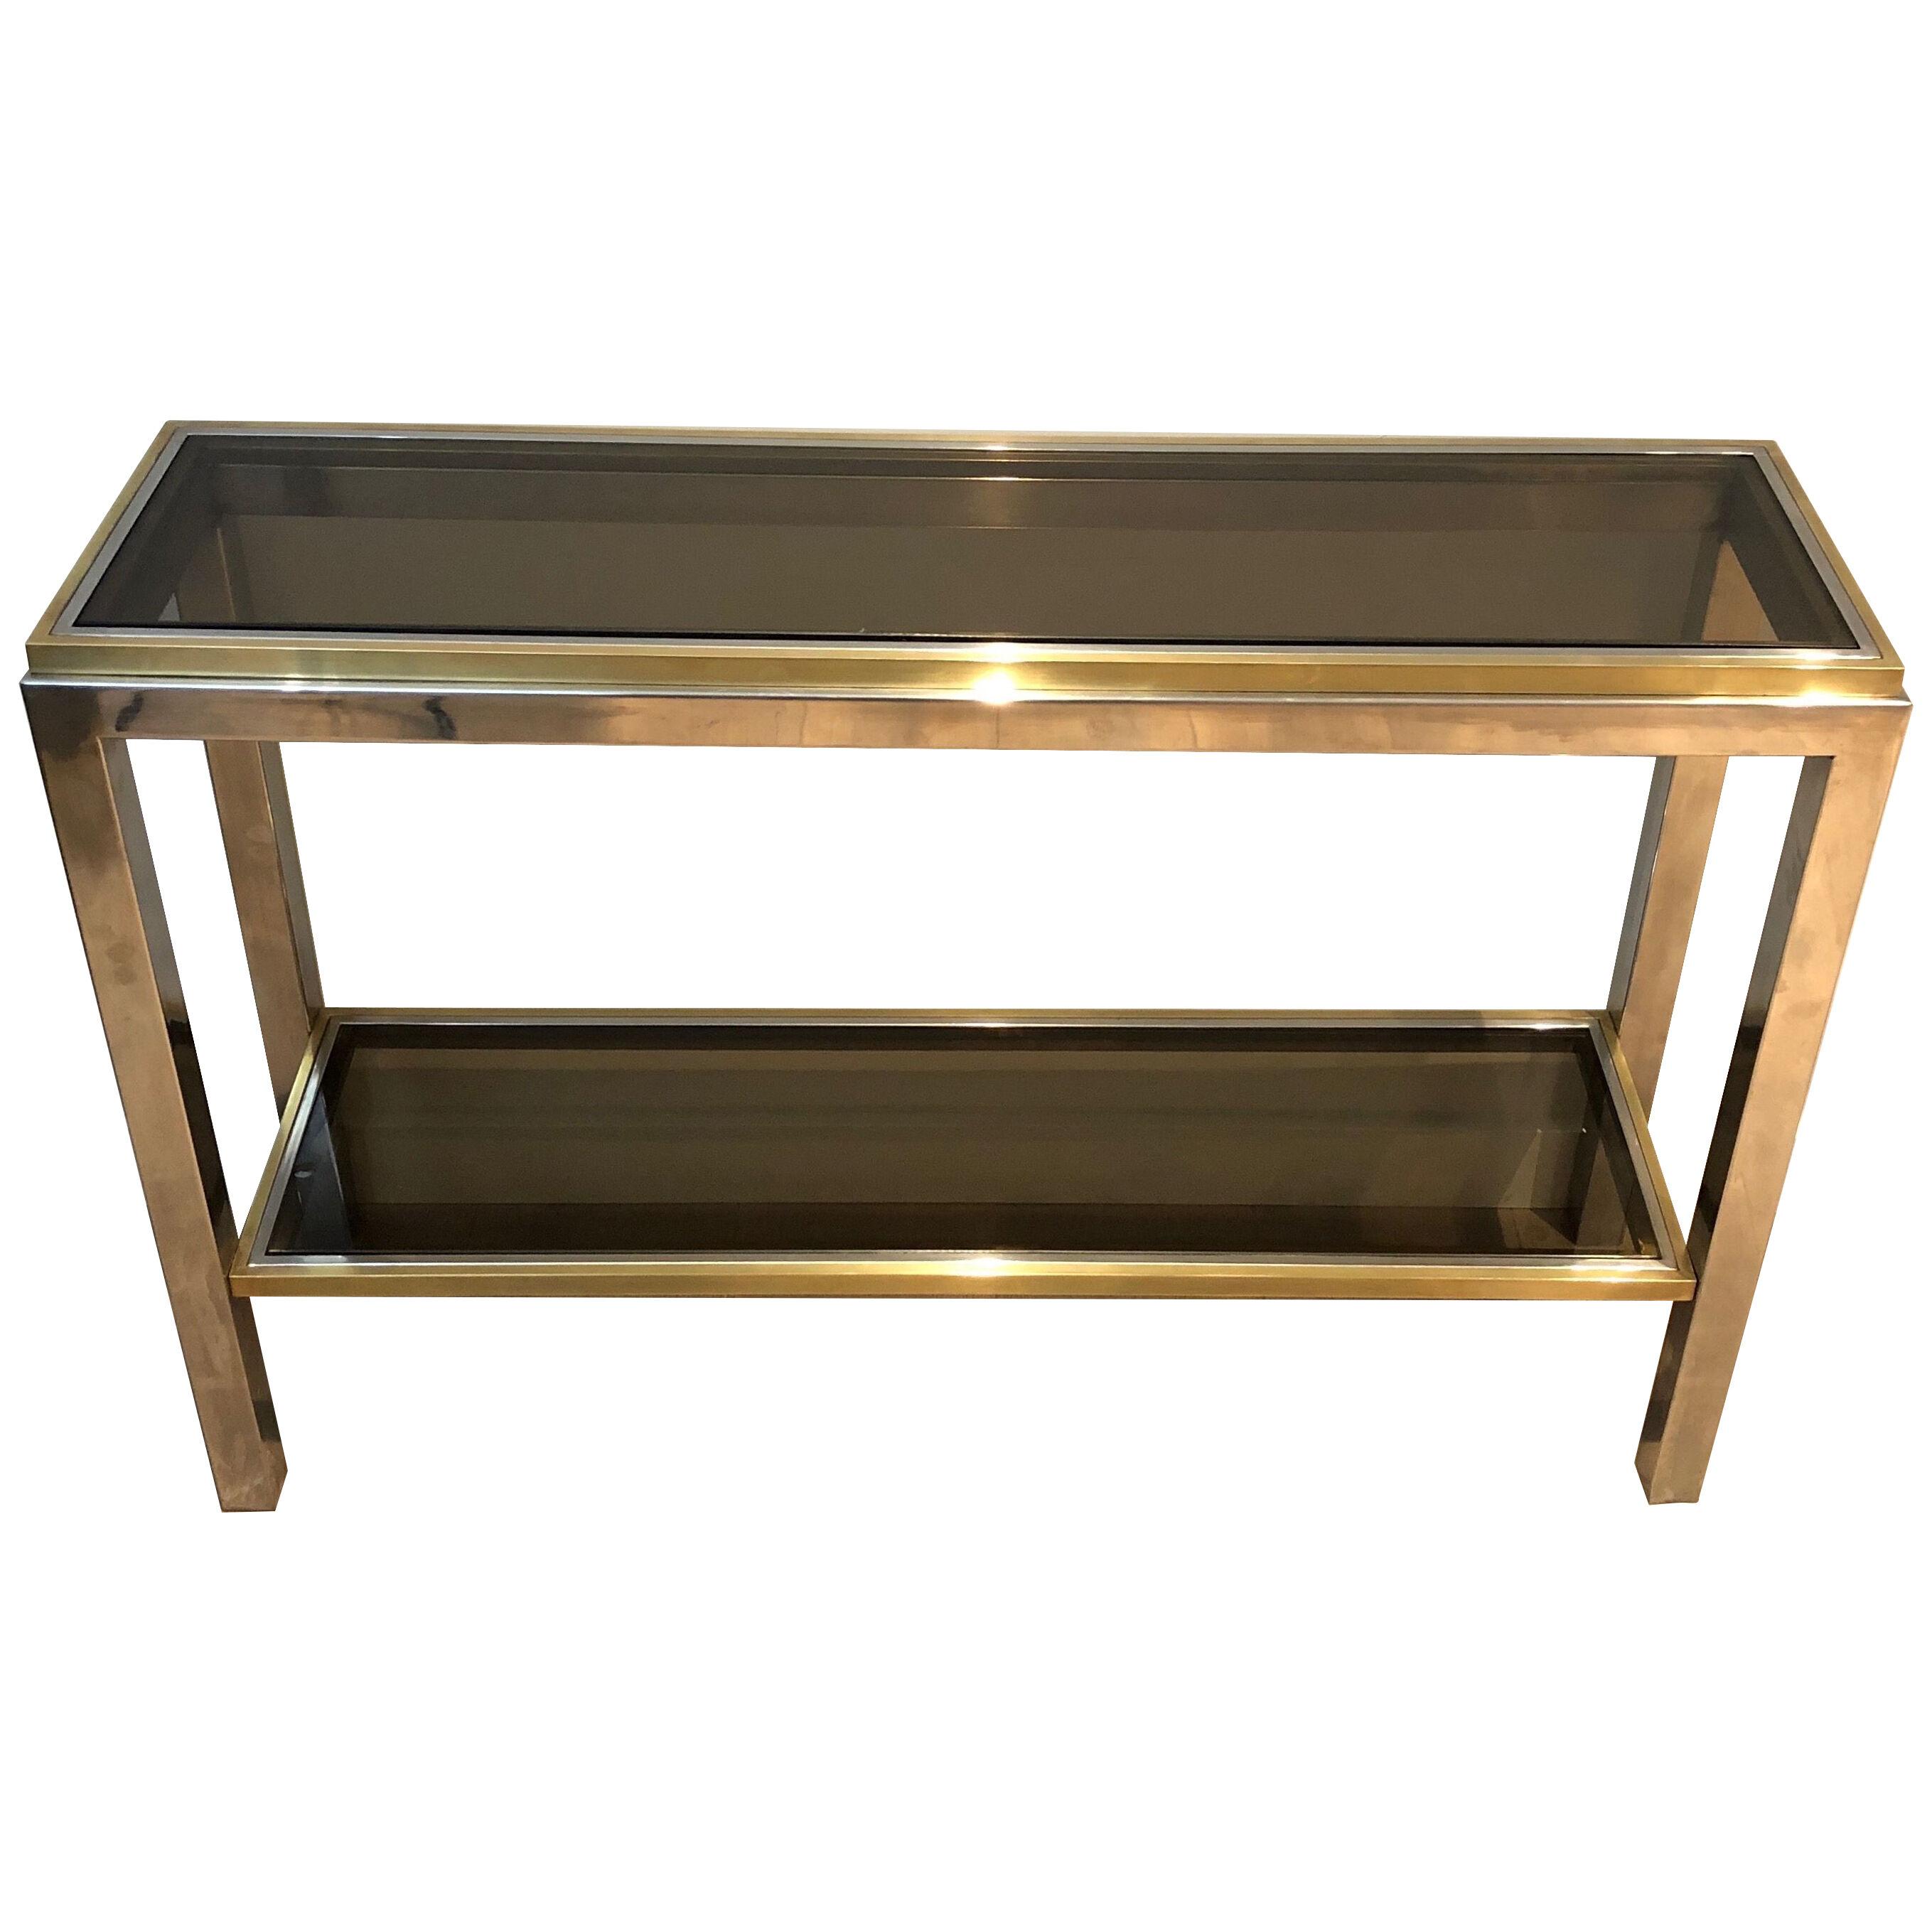 Chrome and Brass Console Table by Willy Rizzo. Circa 1970